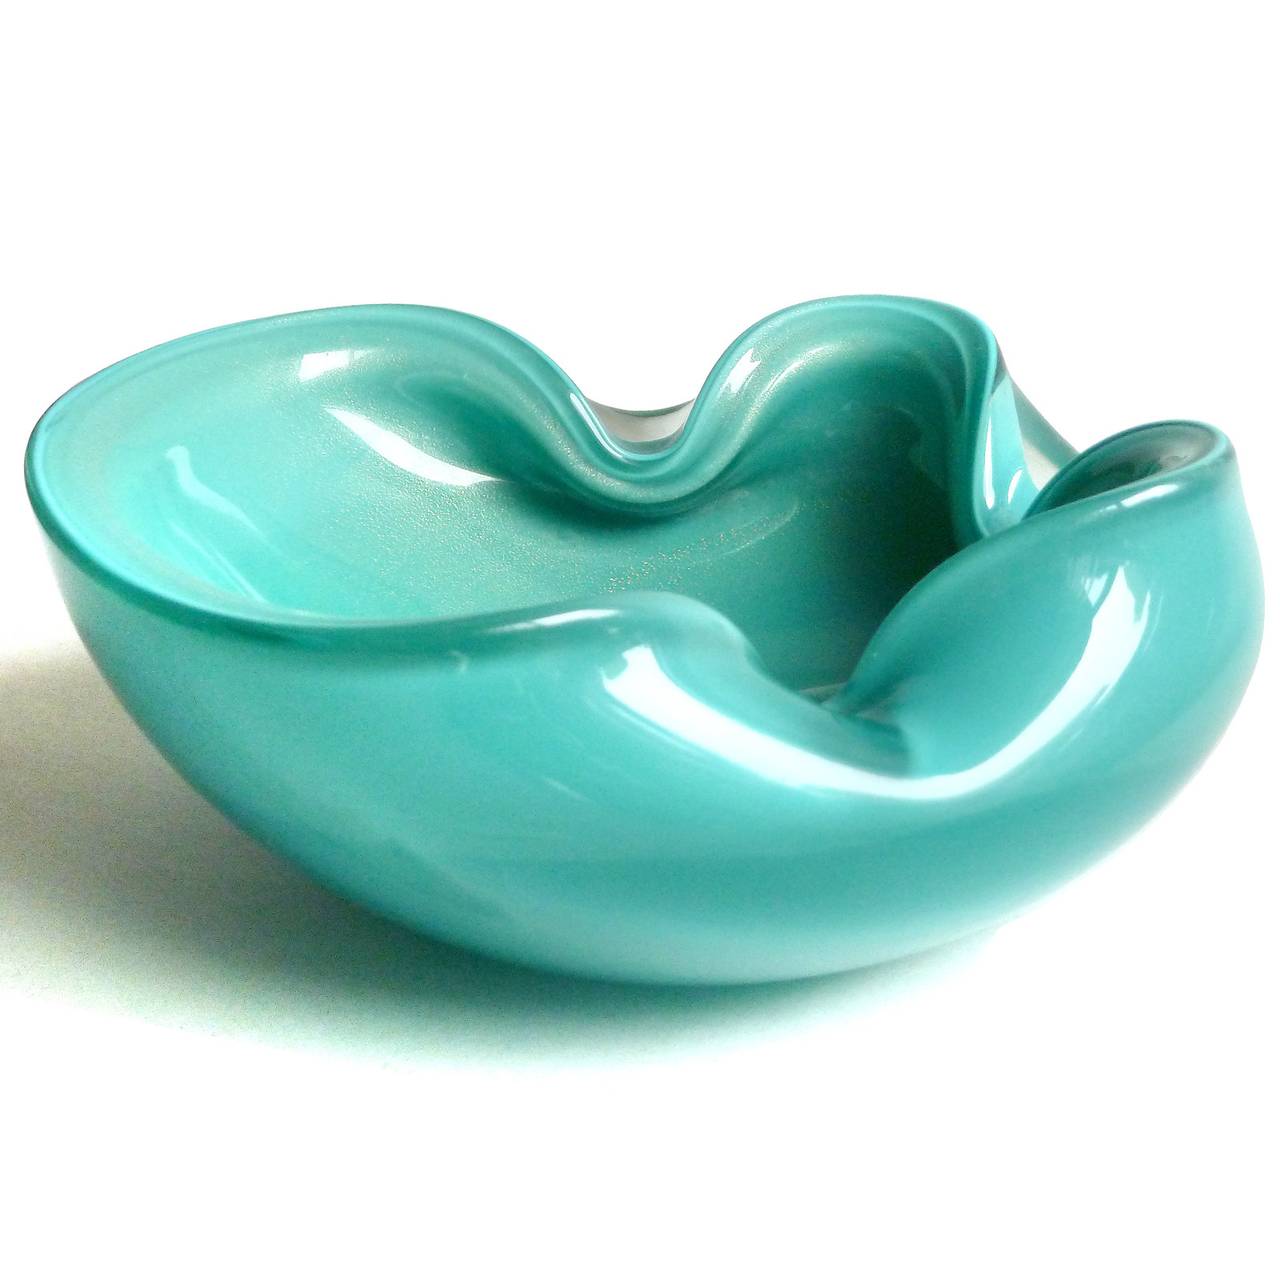 Beautiful vintage Murano hand blown teal blue/green and gold flecks Italian art glass bowl. Documented to designer Alfredo Barbini, circa 1950s. The bowl has theree indents on the rim, and filled with gold leaf on the inside. Can be used as a